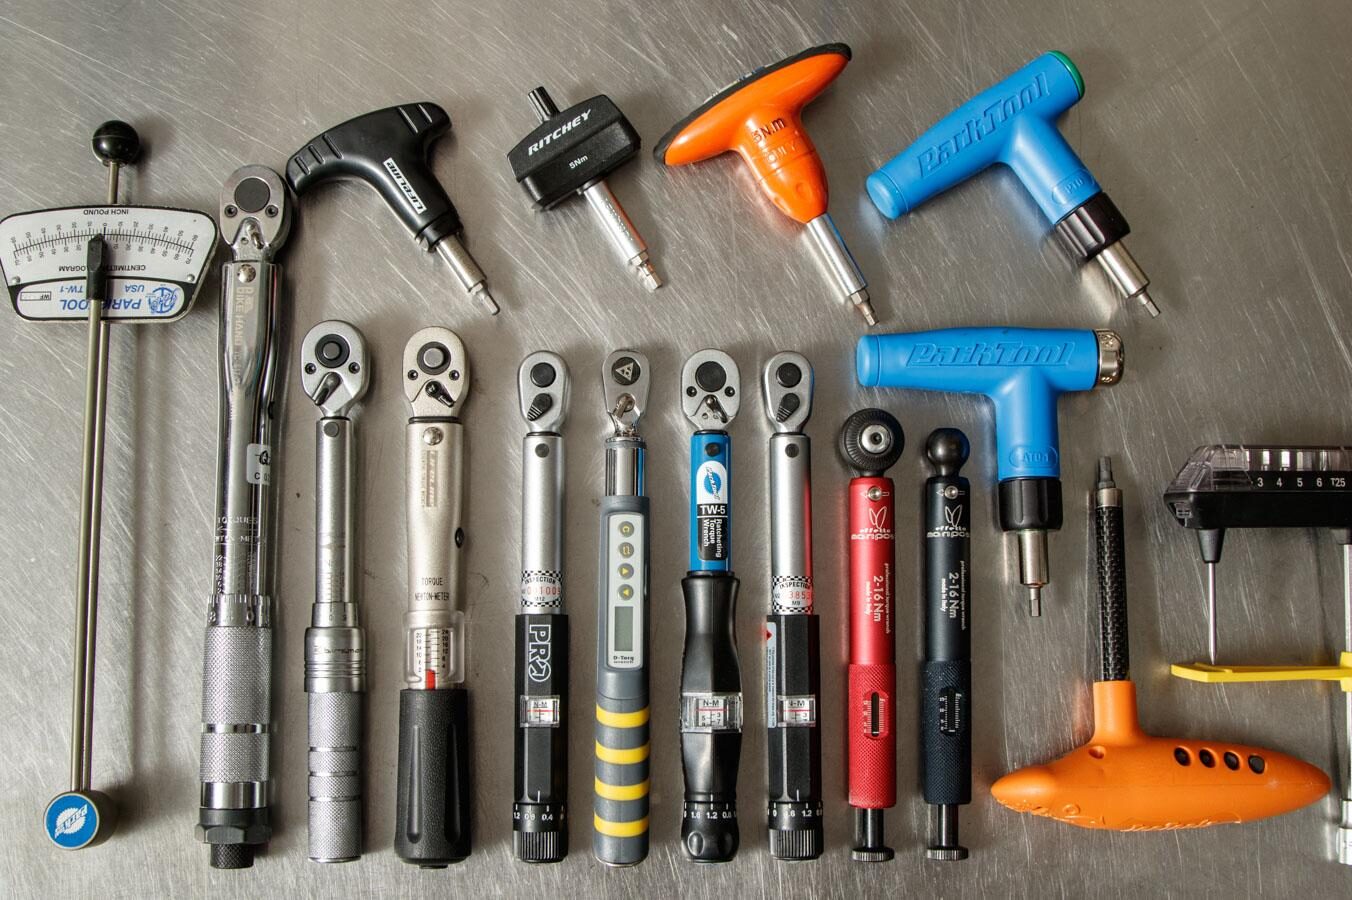 cyclists bike wrenches | for best torque 15 wrenches tested torque The